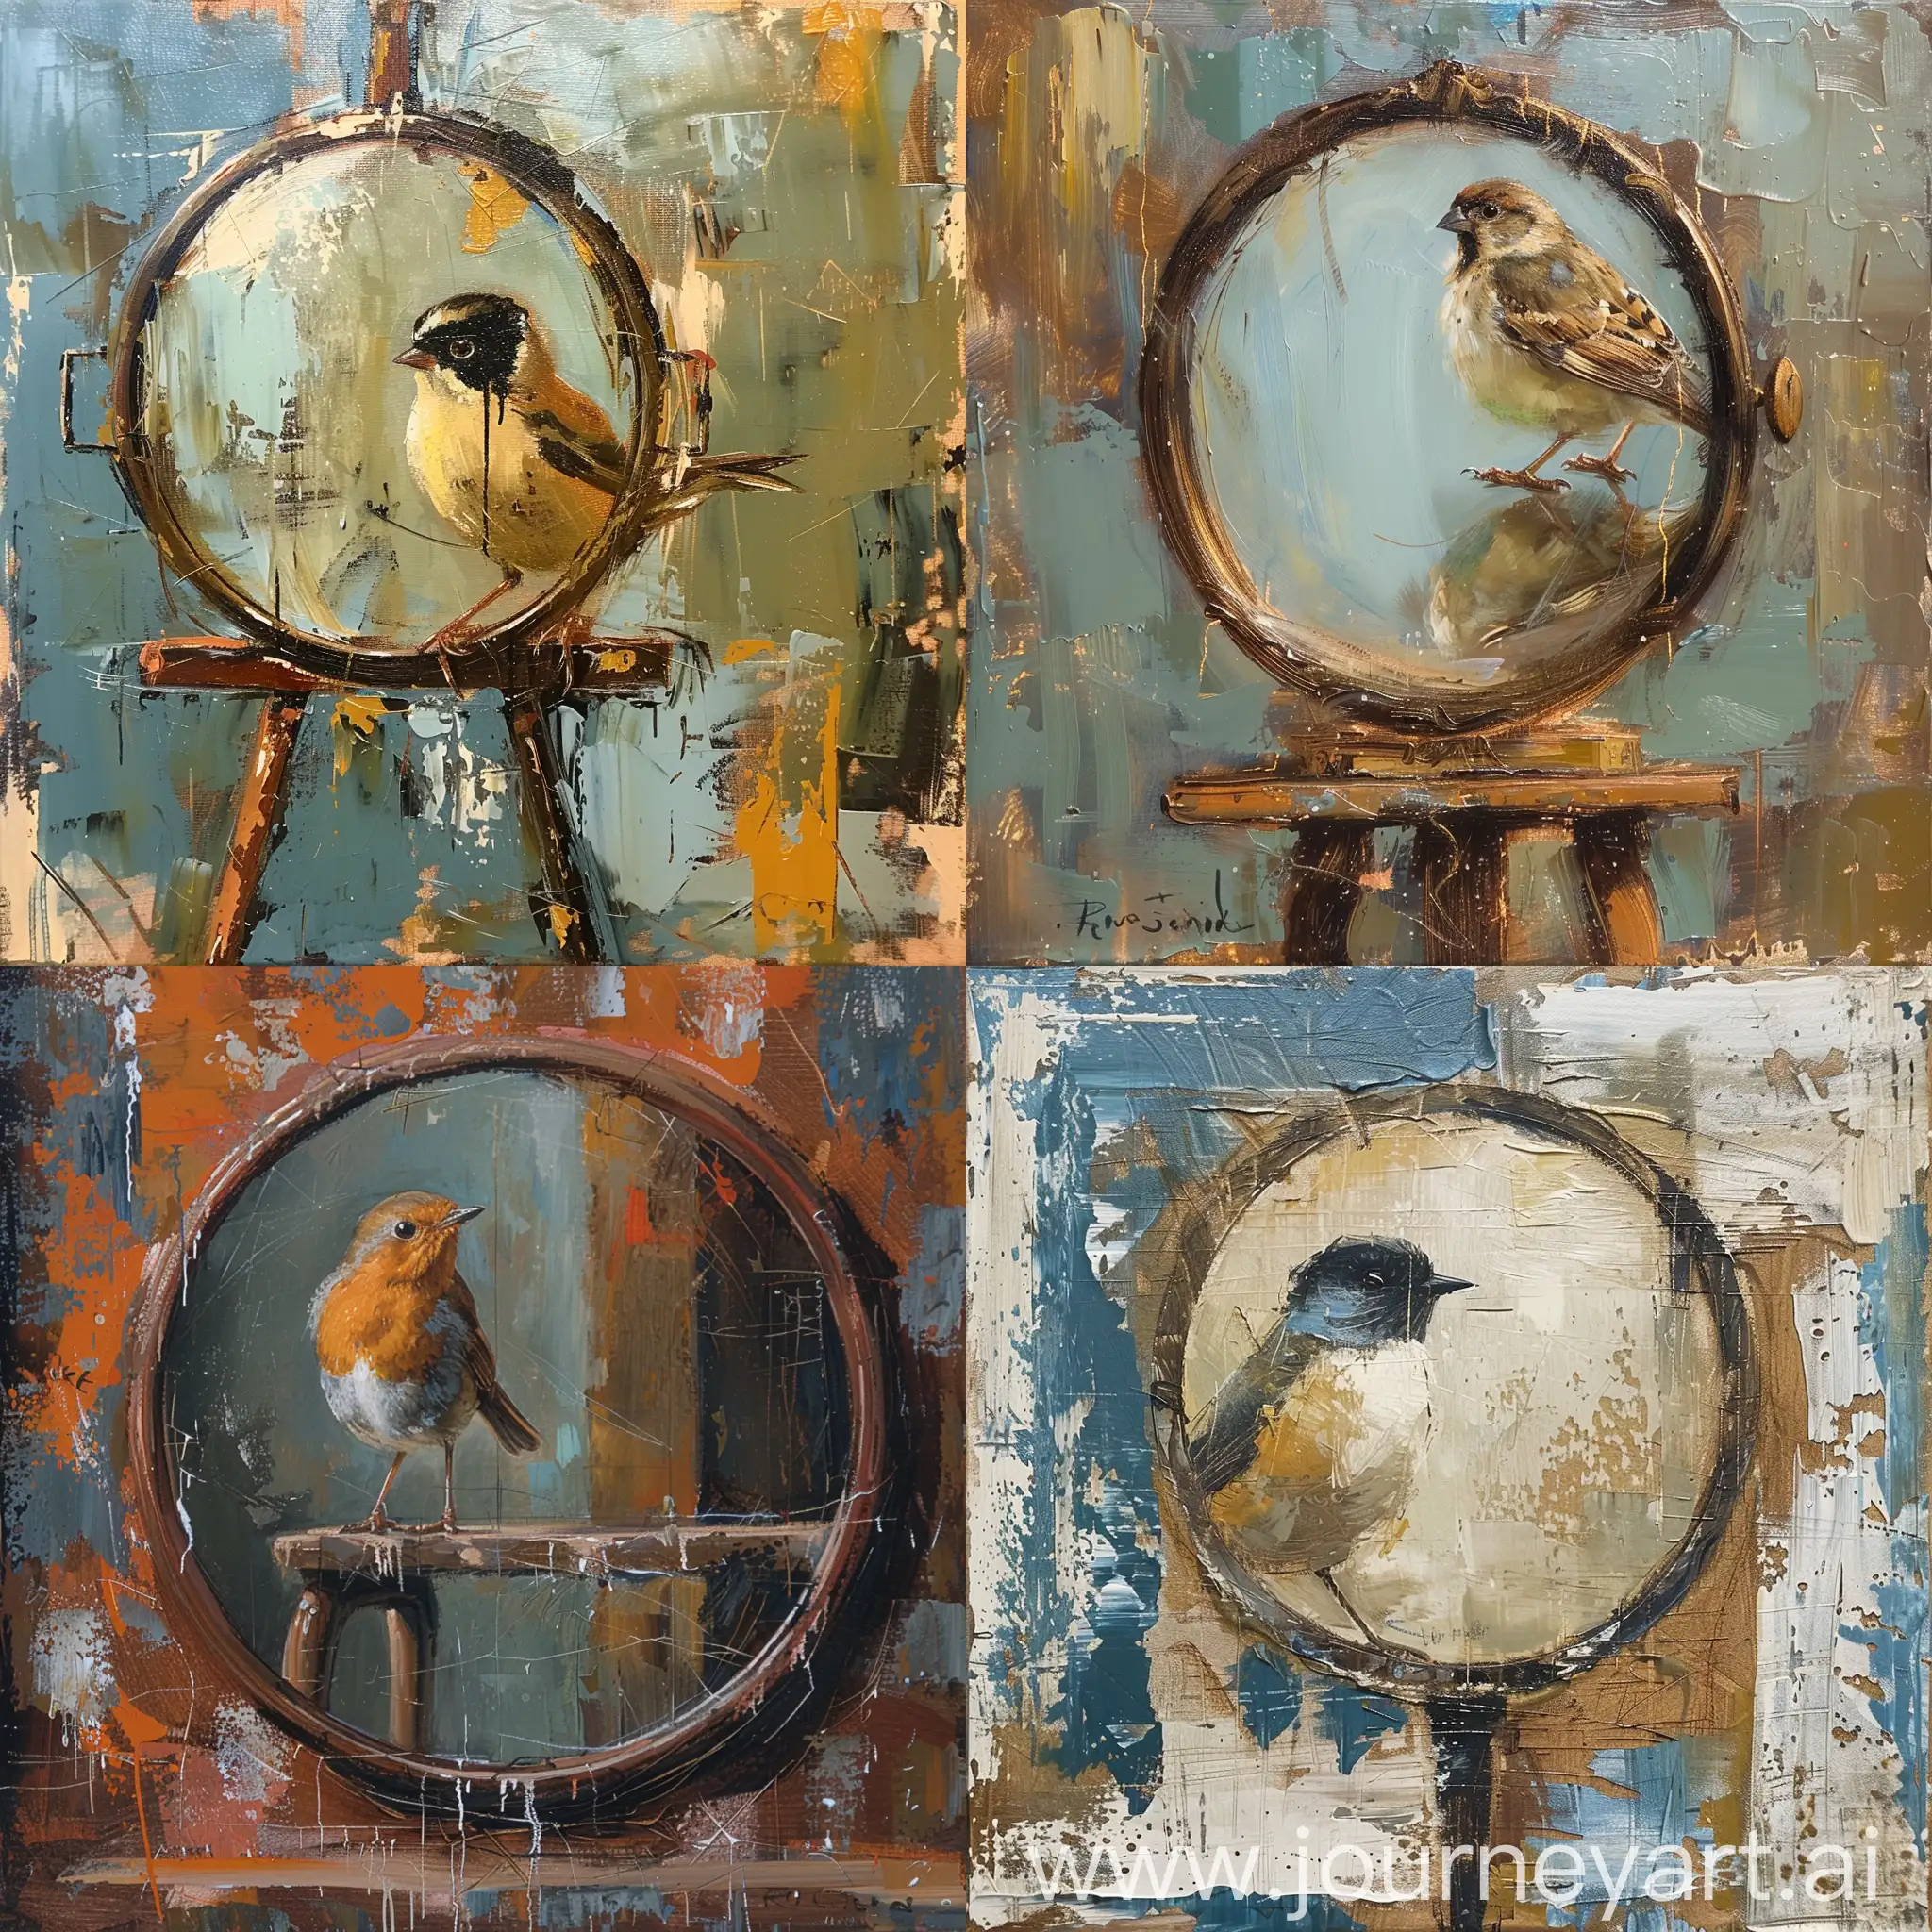 A BIRD IN THE MIRROR IN A 19 CENTURY abstract PAINTING STYLE 